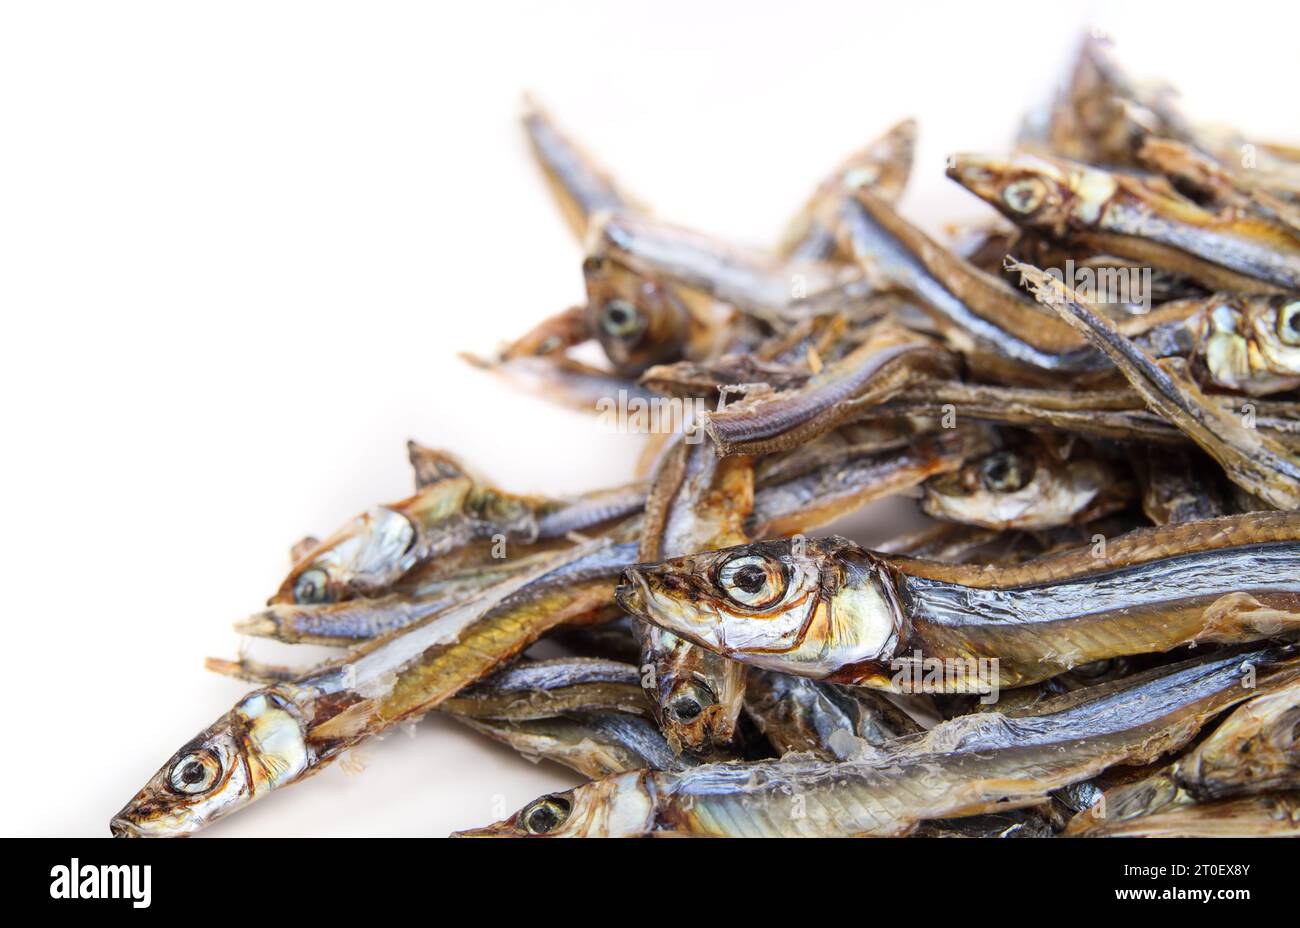 Pile of dried sardines for dogs and cats for treats. Many dehydrated fishes in multiple sizes. Healthy dog snack or health supplement rich on protein, Stock Photo